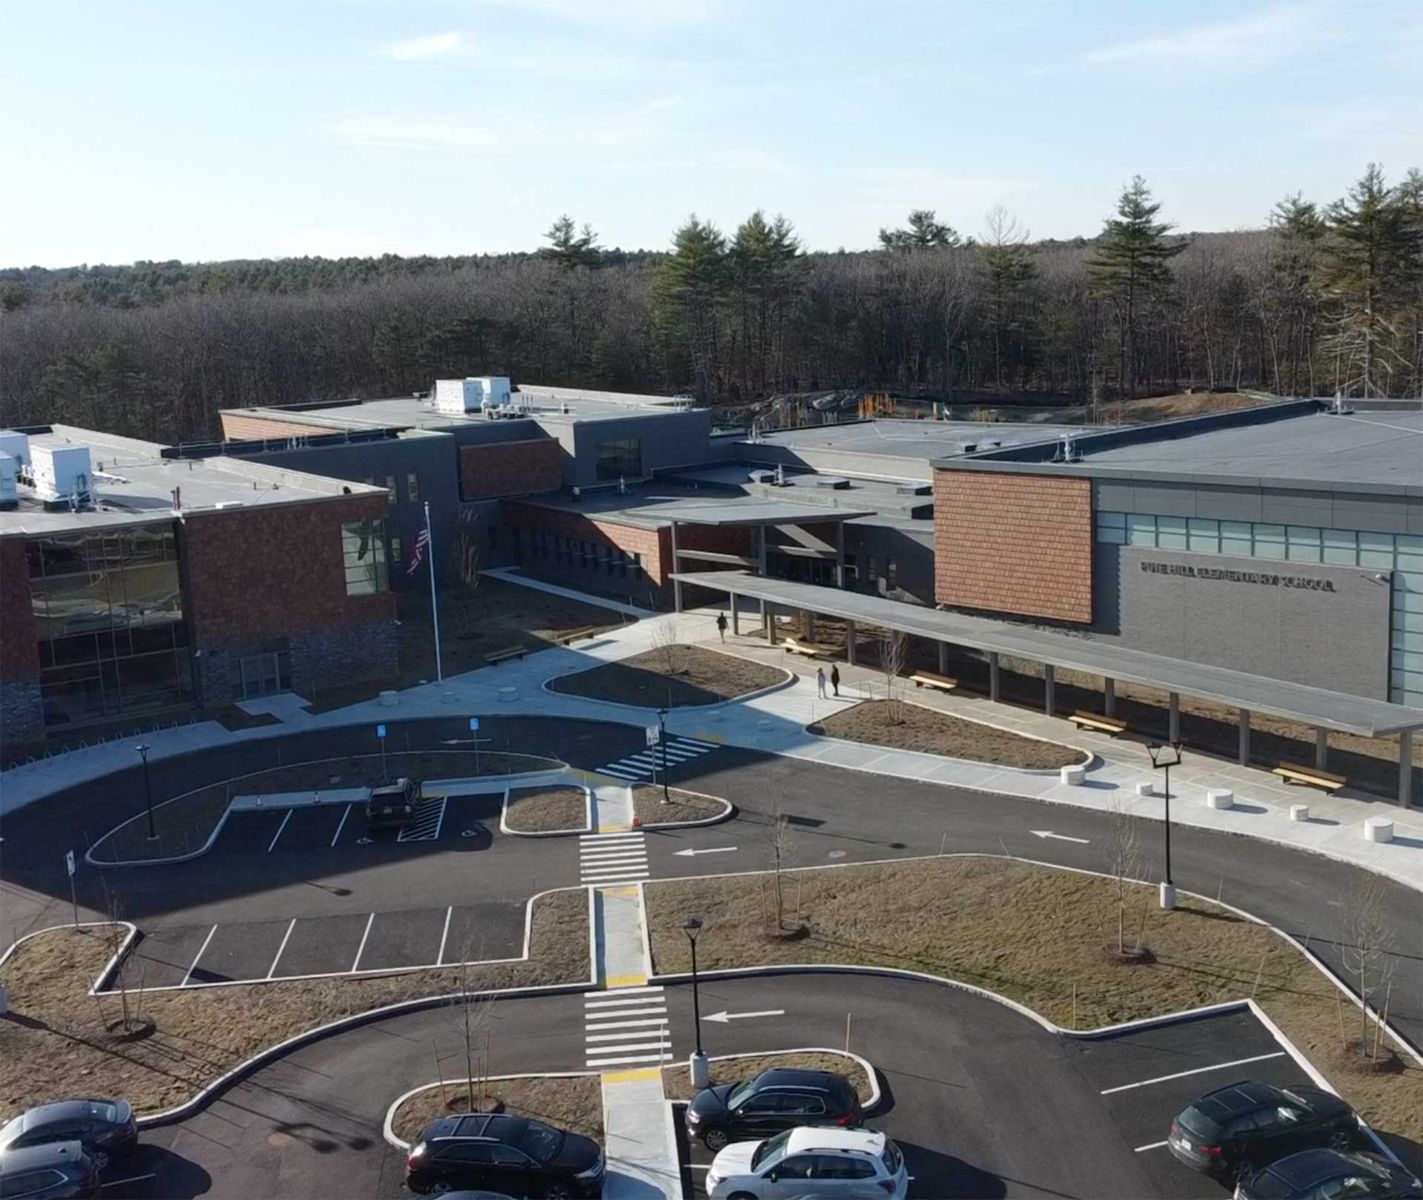 A drone image of the Pine Hill Elementary School.